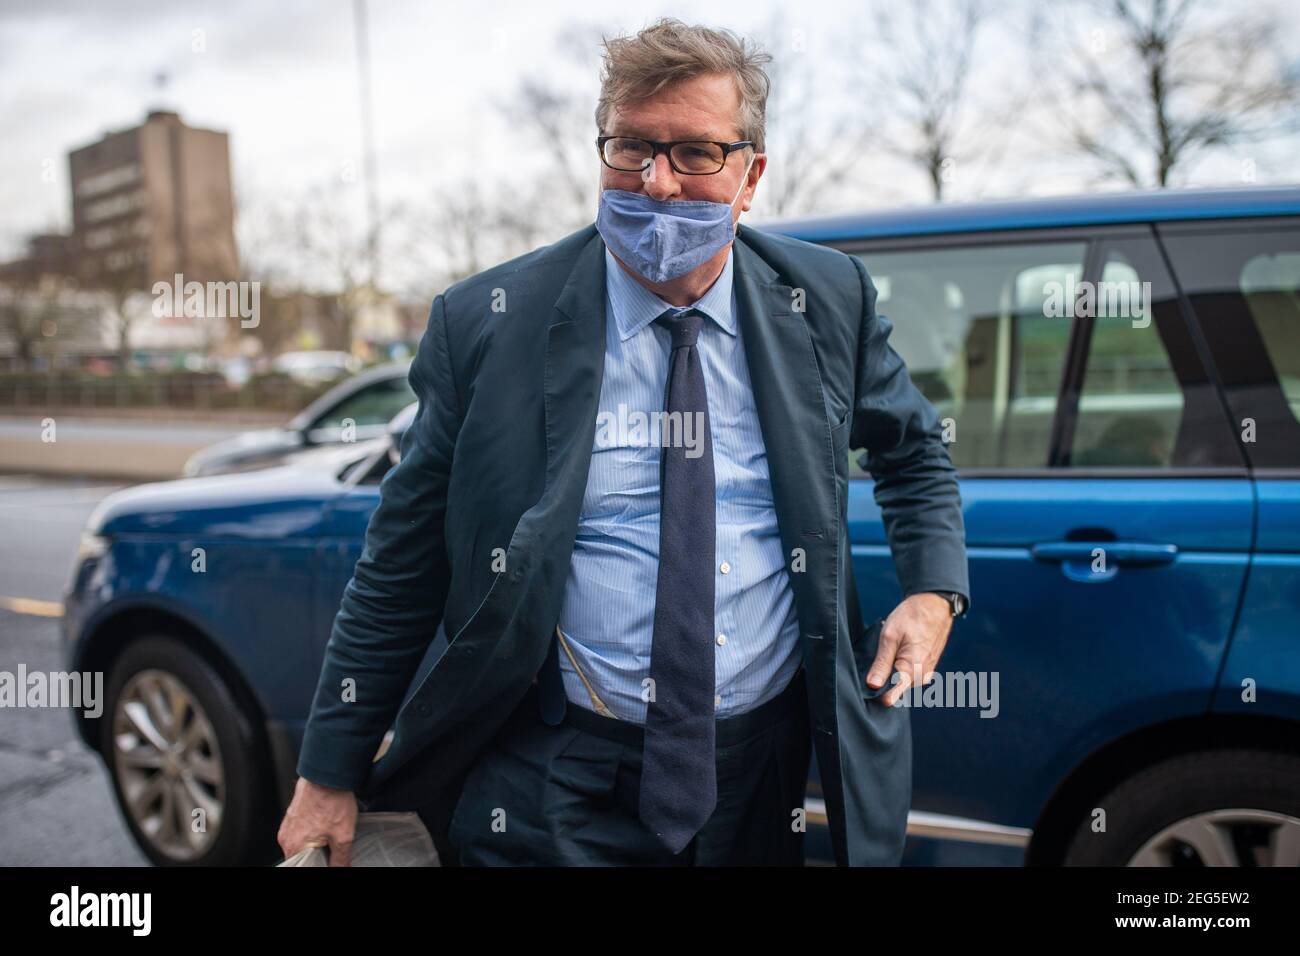 Hedge fund manager Crispin Odey arrives at Hendon Magistrates' Court, London,  where he is appearing on charges of indecent assault. The hedge fund manager,  61, is accused of indecently assaulting a woman